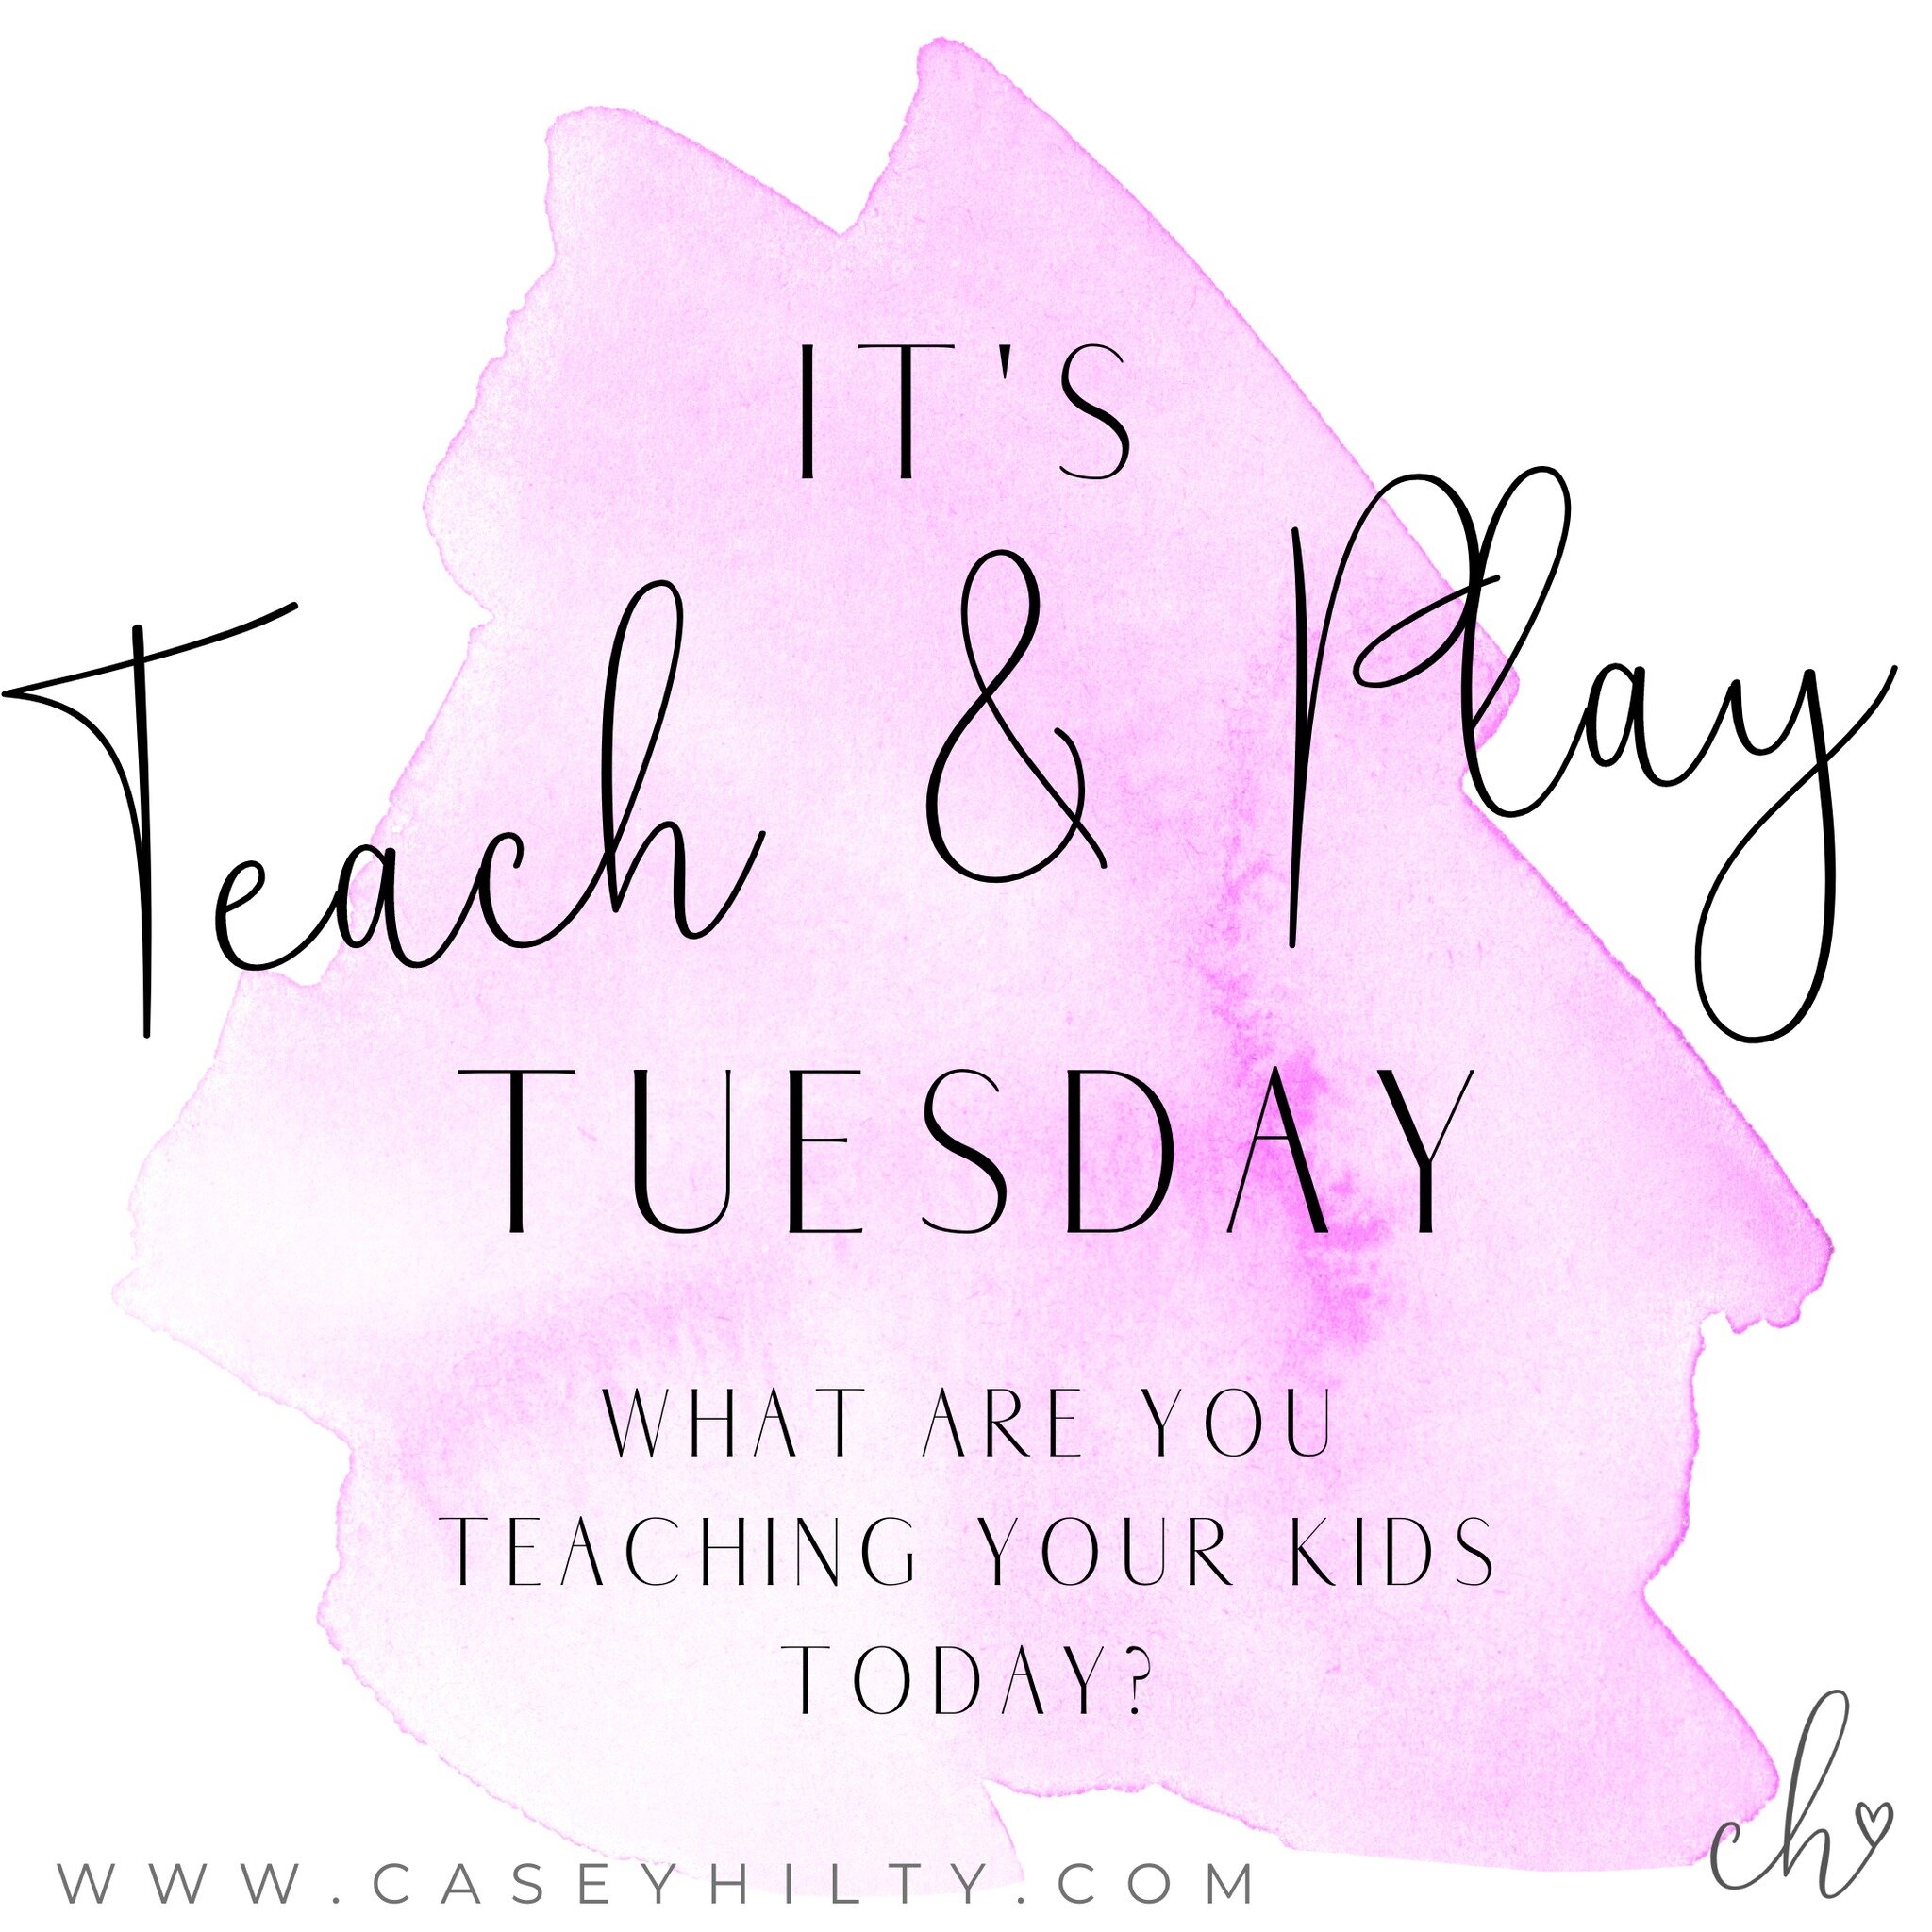 Remember those takeaways from Sunday&rsquo;s sermon??? Time to revisit those again! What are some practical ways you can put those thoughts into action and how can you teach them to your kids? Sit down and play with your kids today&hellip;maybe a gam